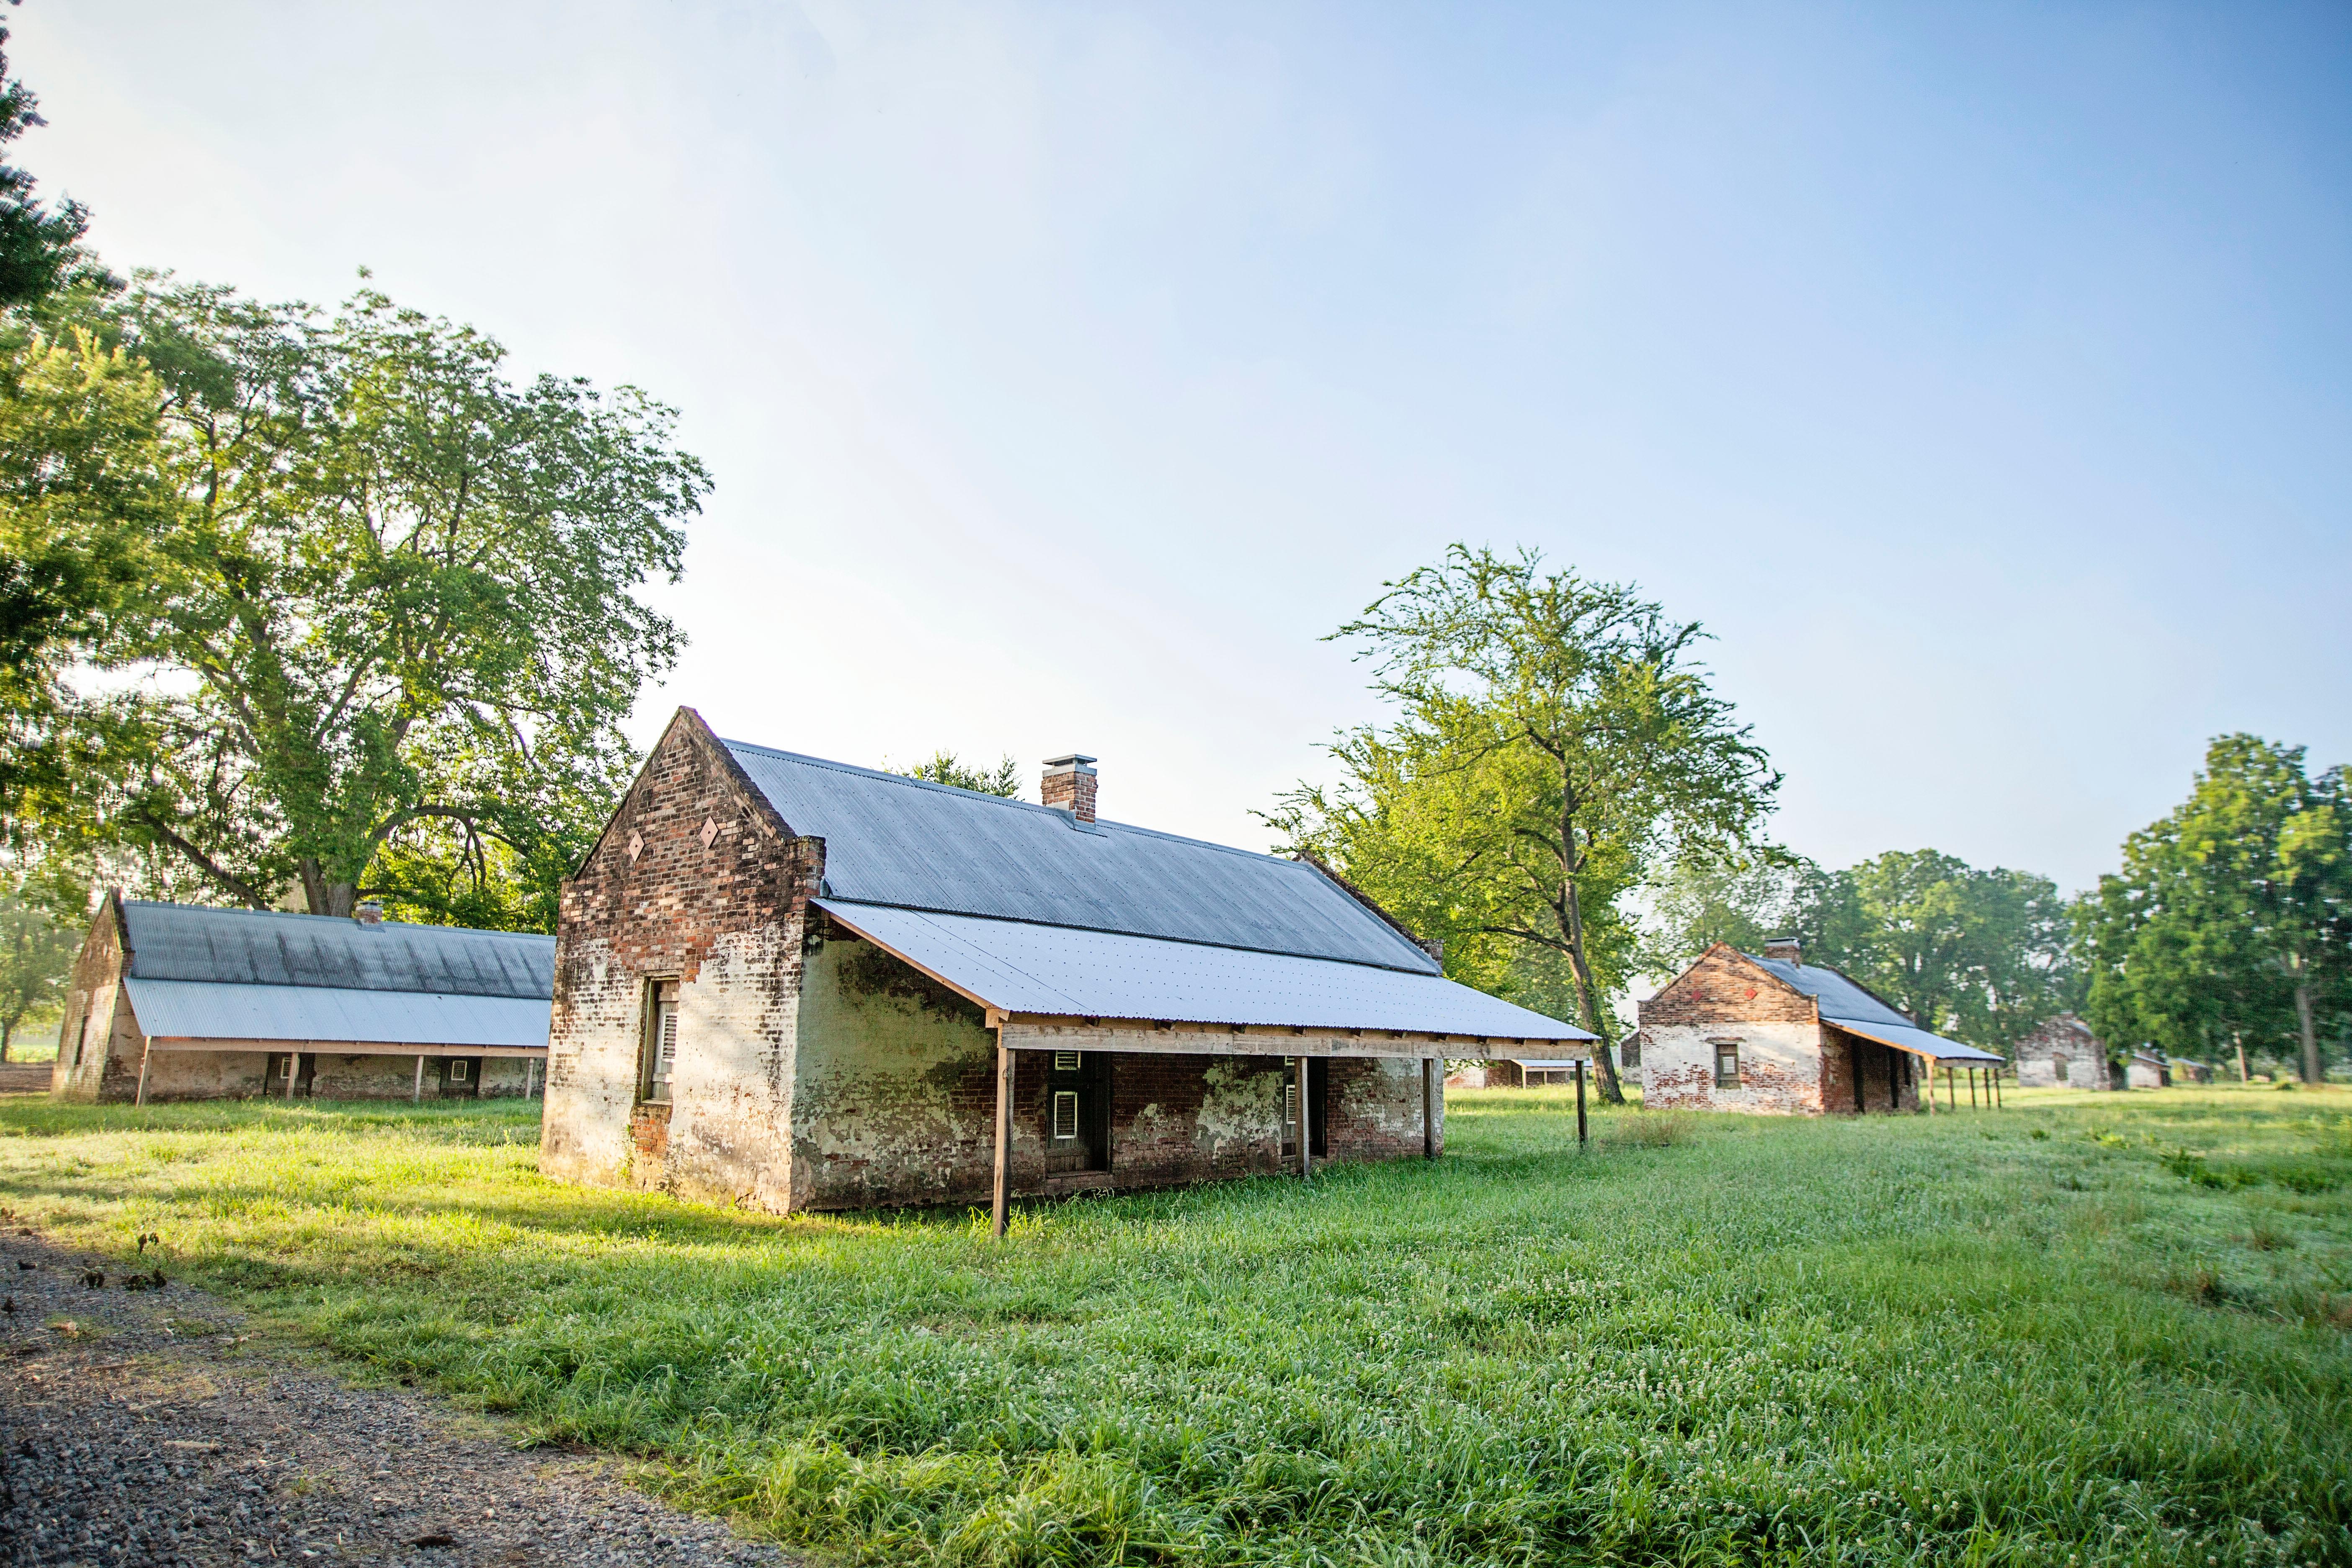 Brick cabins built to house enslaved workers, served as homes for tenant farmers into the 1960s.